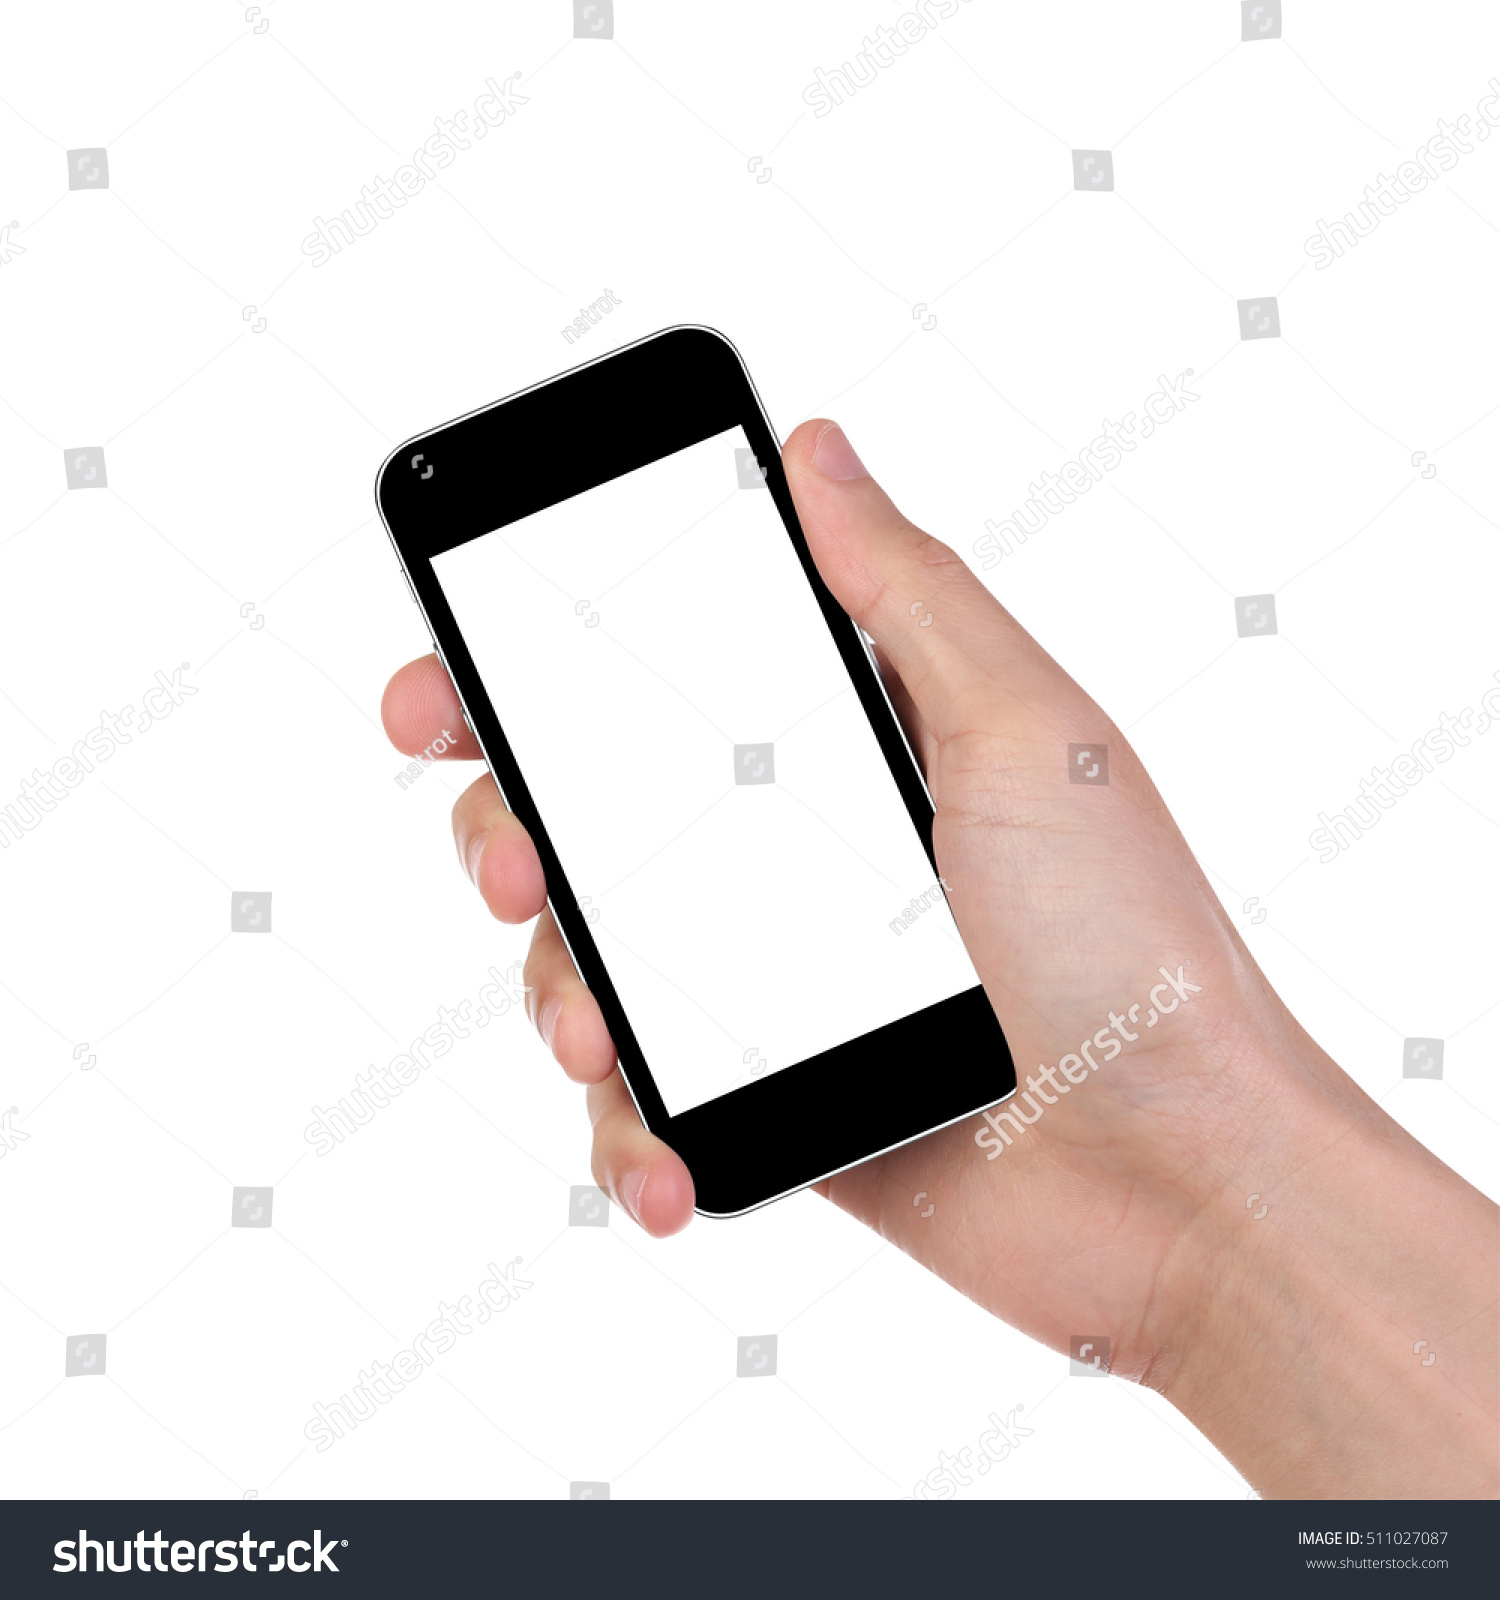 Man hand holding the black smartphone isolated on white background. Clipping path. #511027087